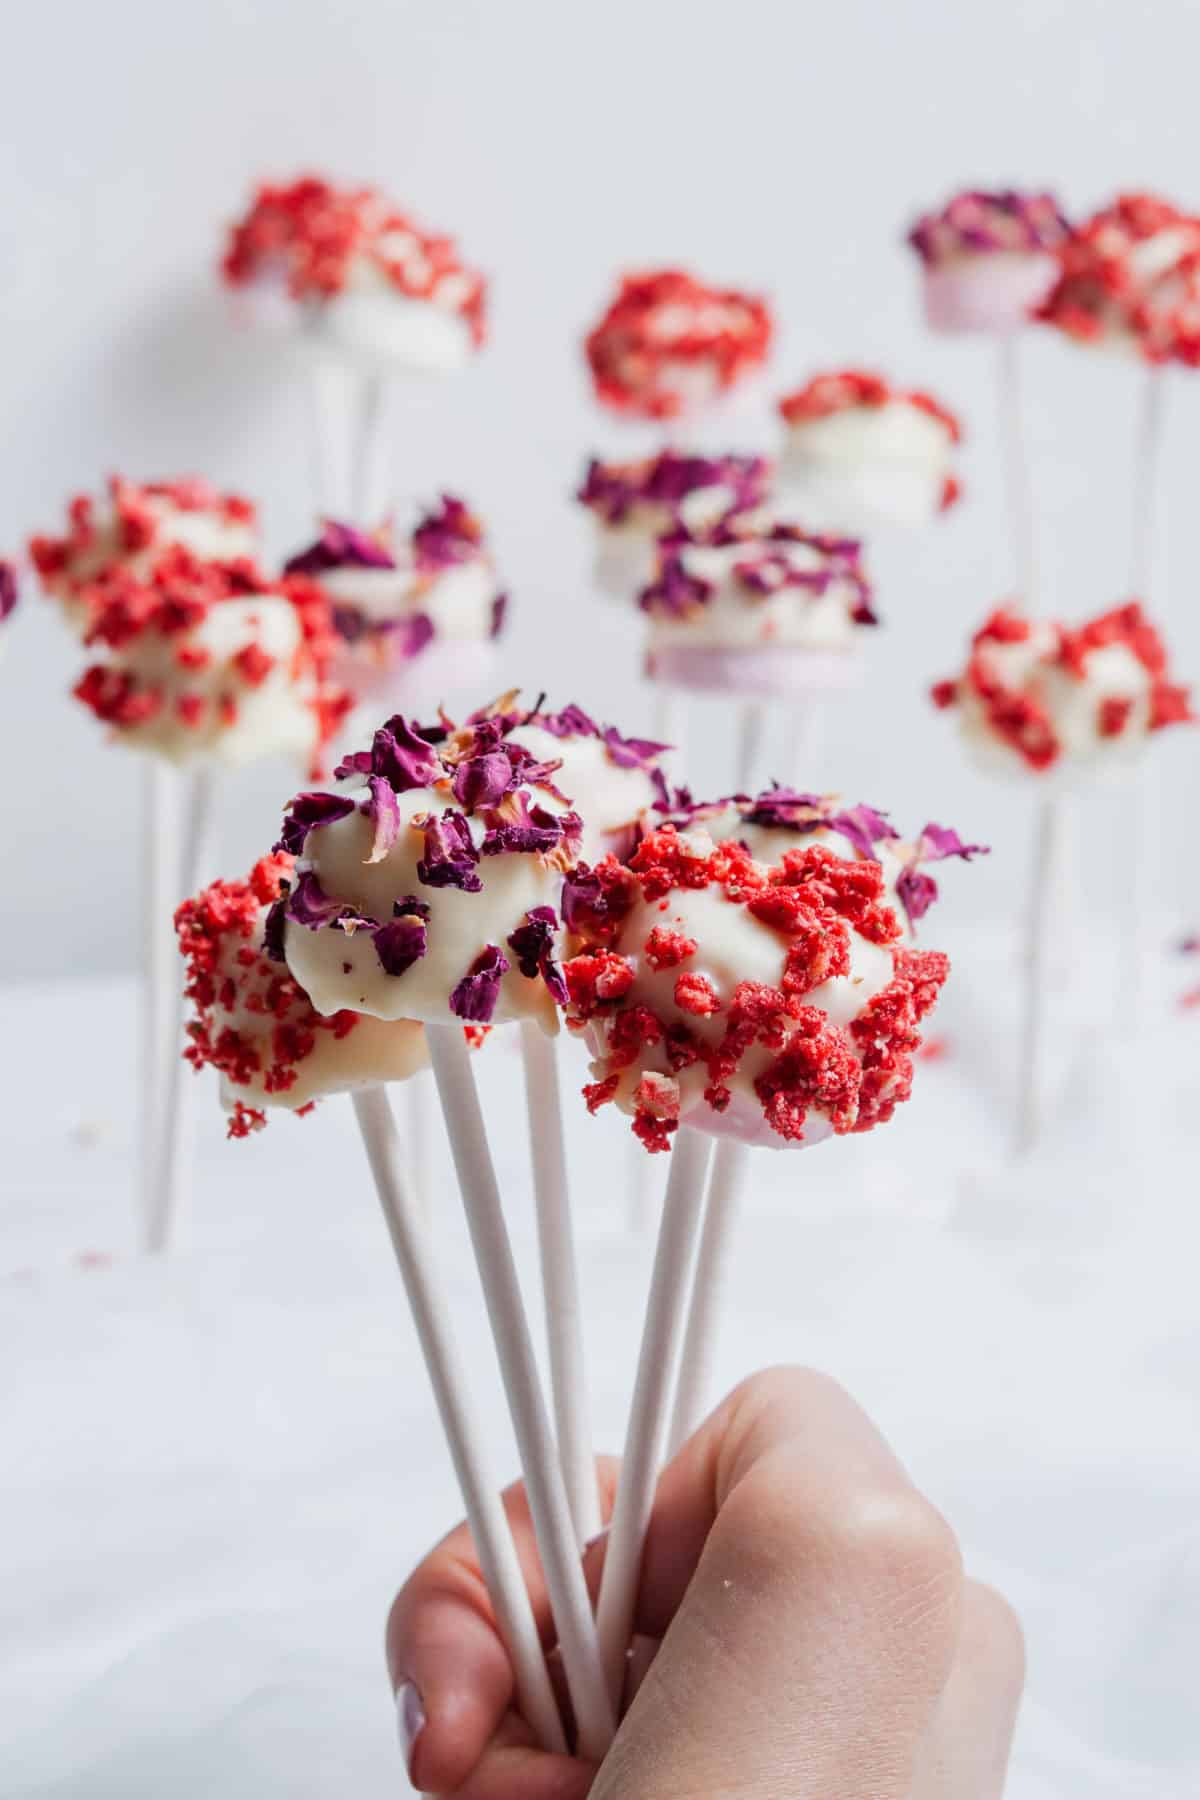 a hand holding up some coated and decorated marshmallows with more in the background.